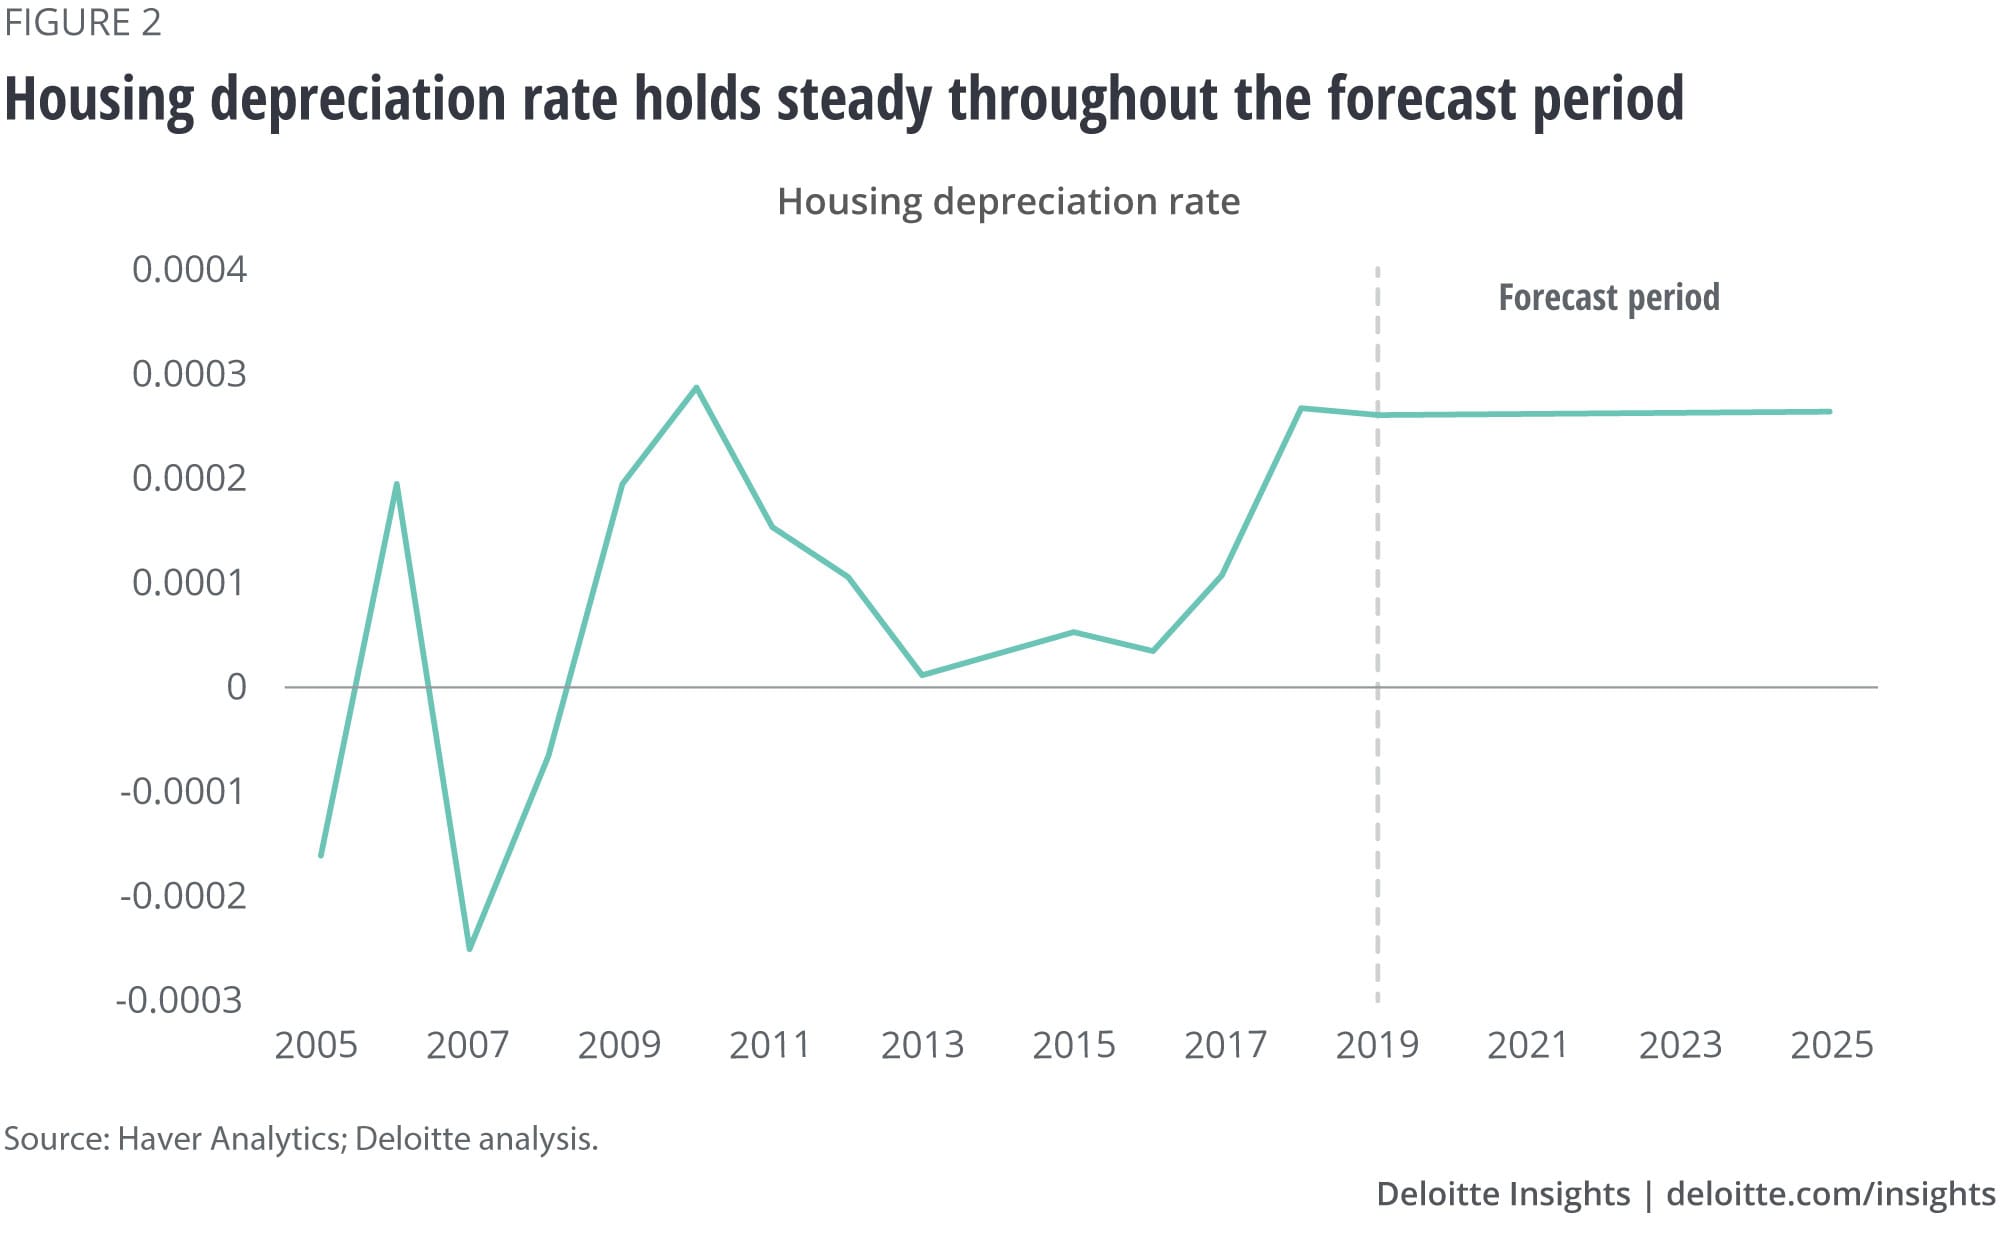 Housing depreciation rate holds steady throughout the forecast period